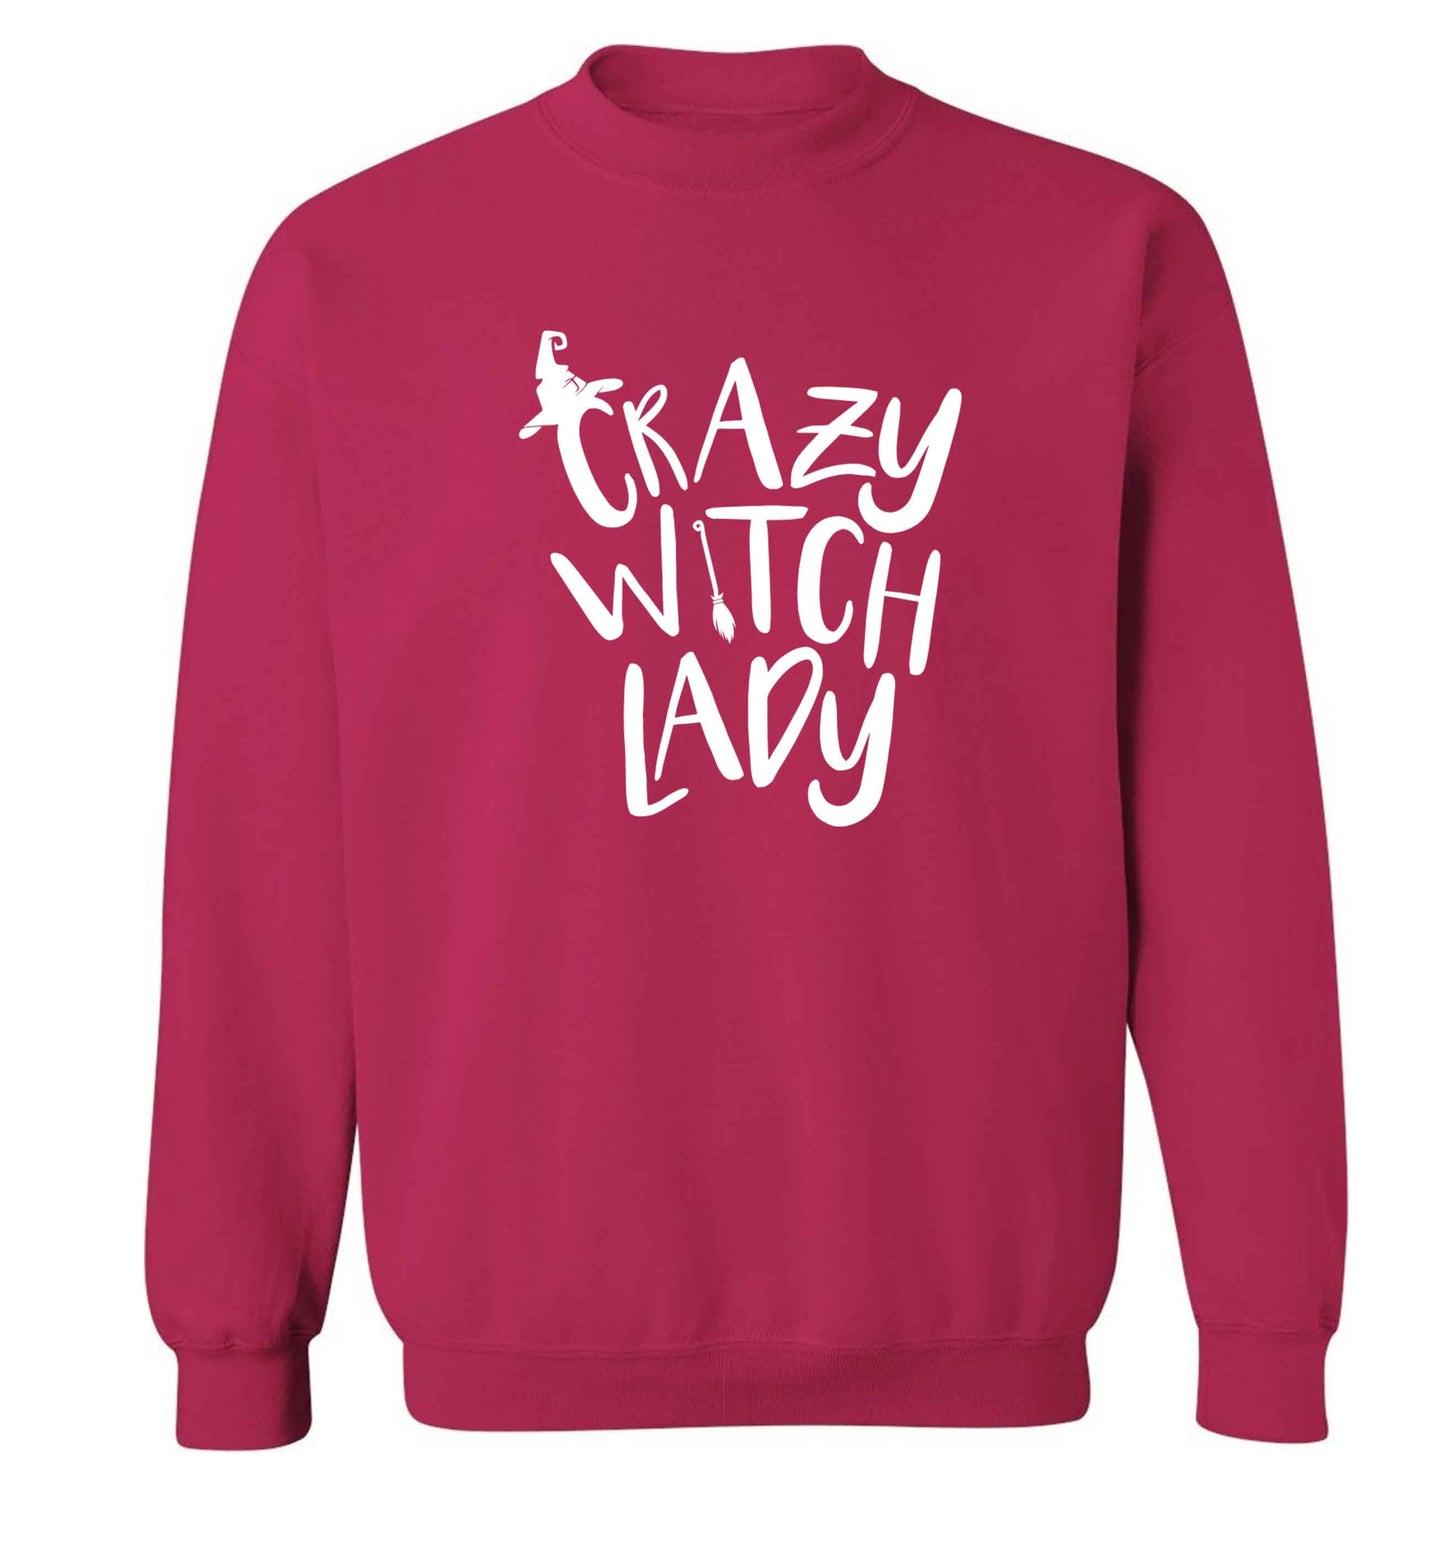 Crazy witch lady adult's unisex pink sweater 2XL